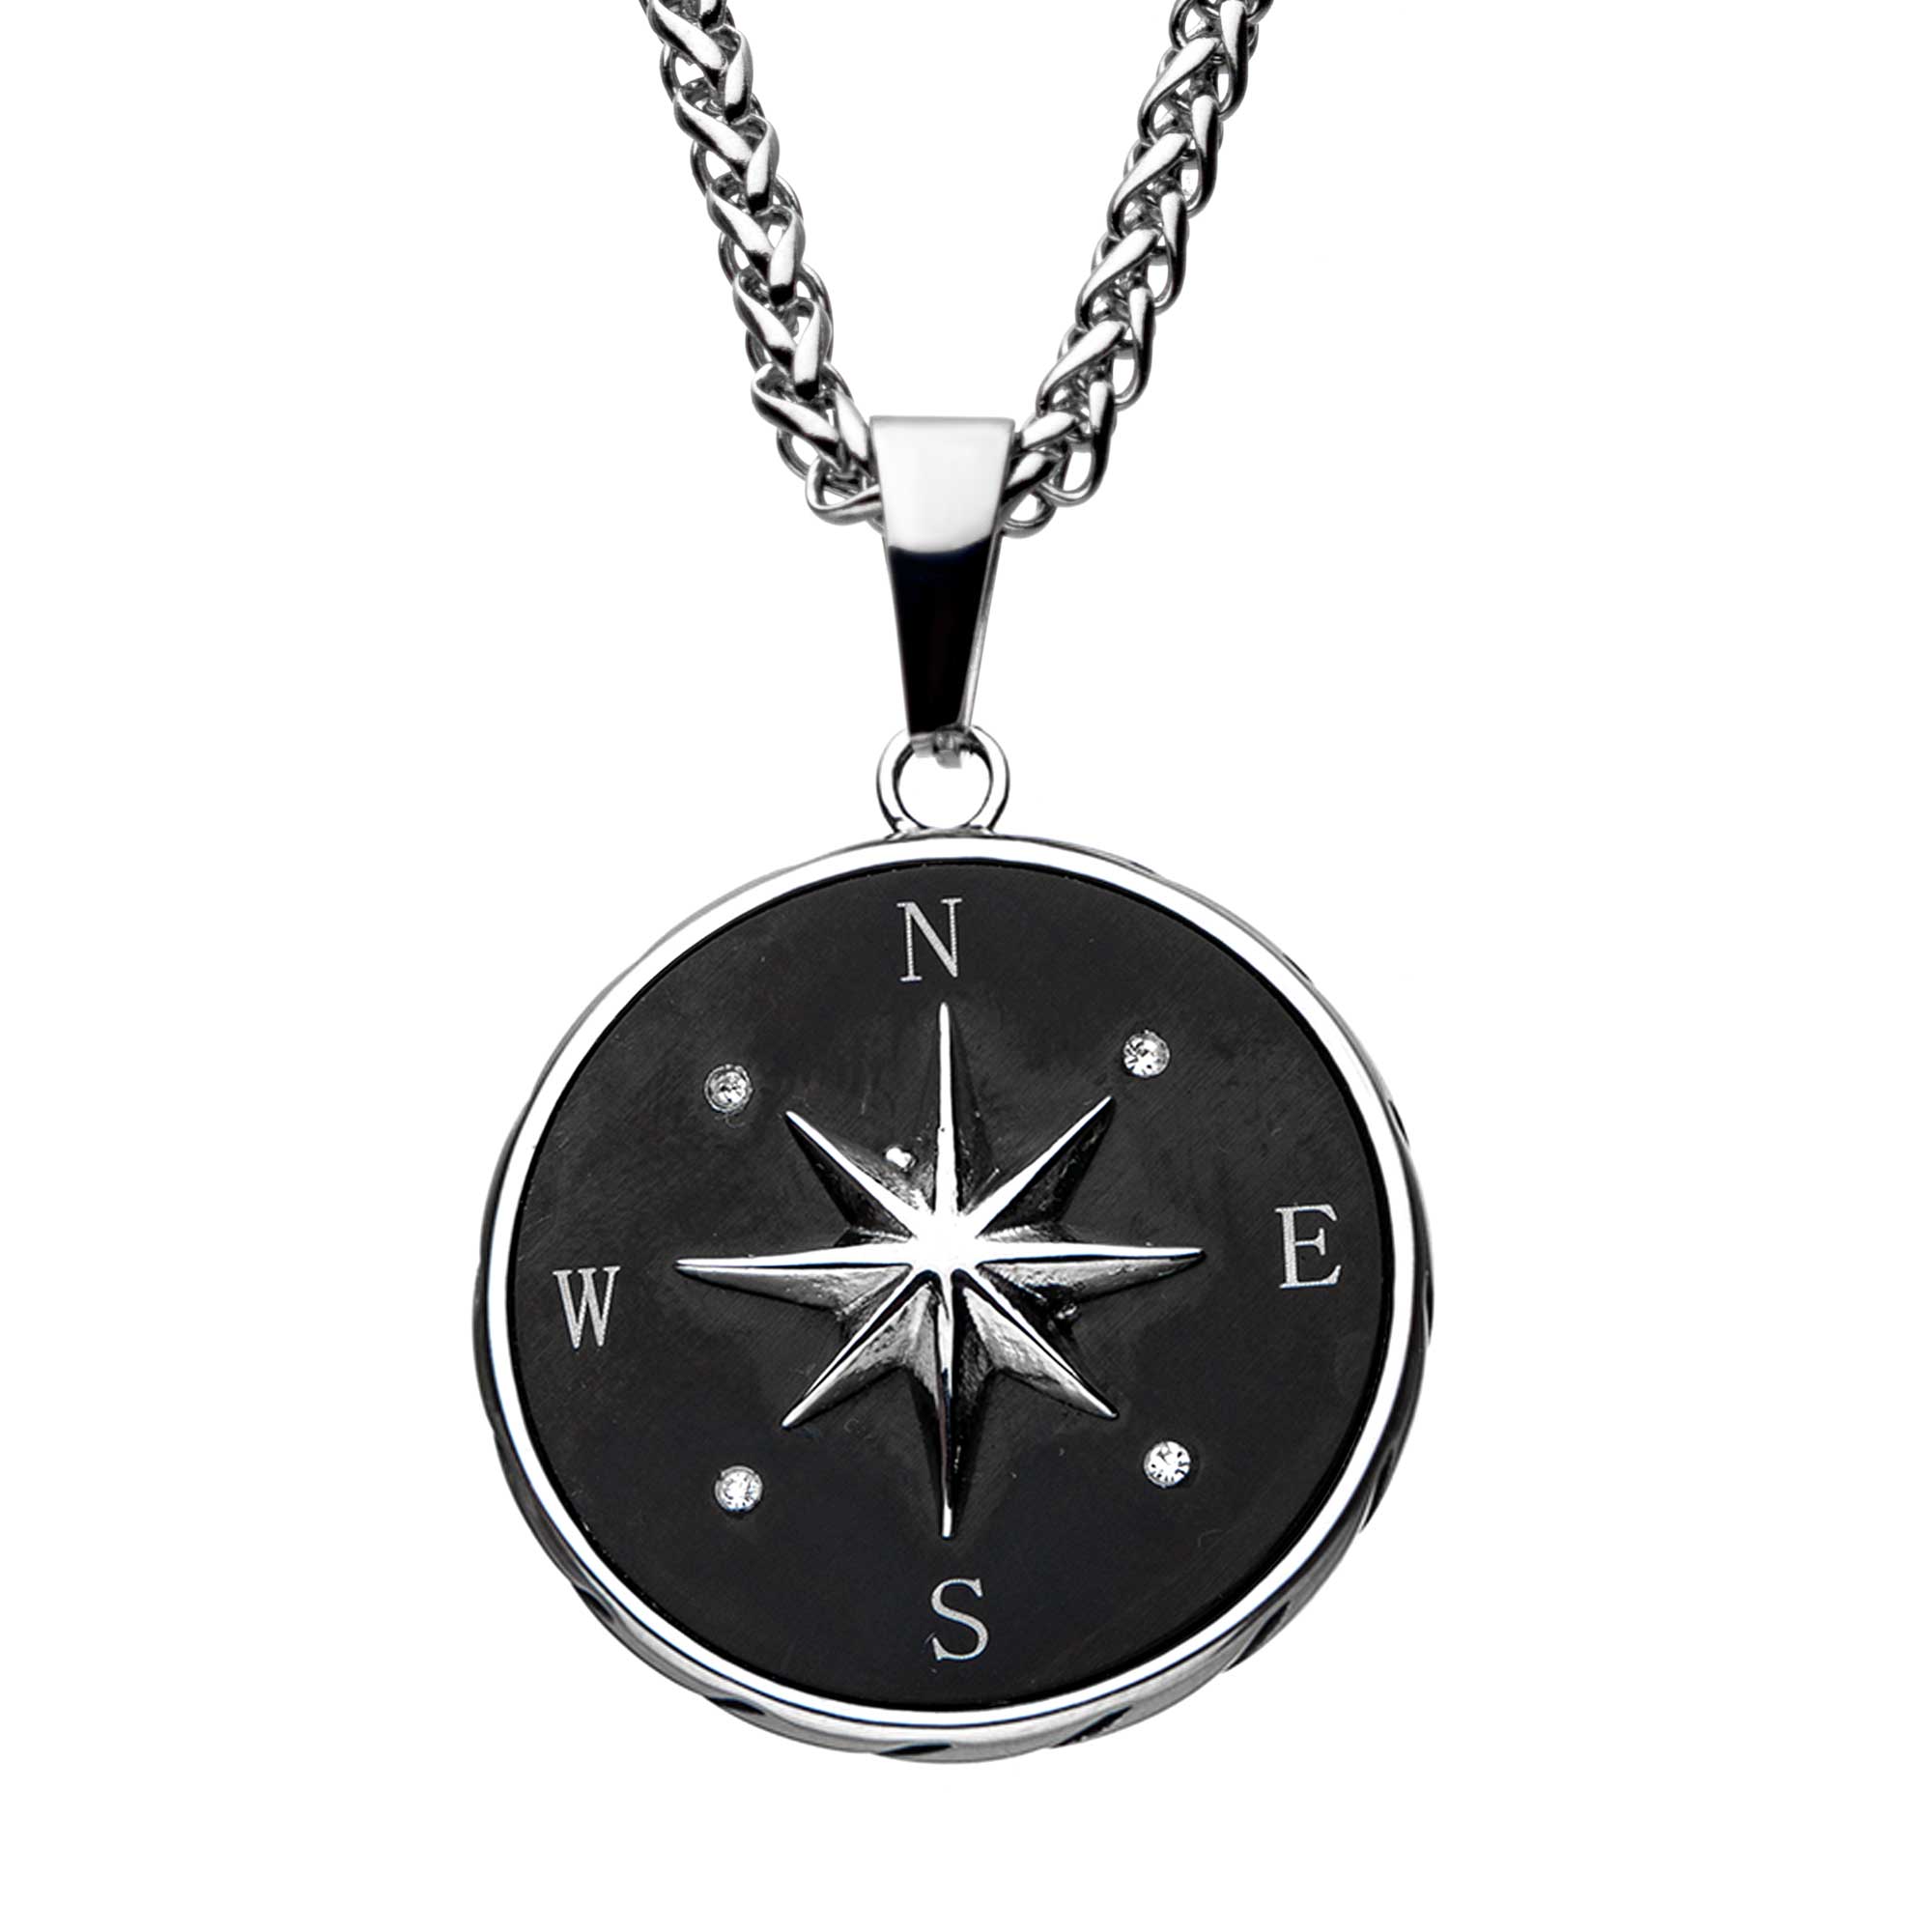 Stainless Steel and Black Plated Compass Pendant with Chain Thurber's Fine Jewelry Wadsworth, OH